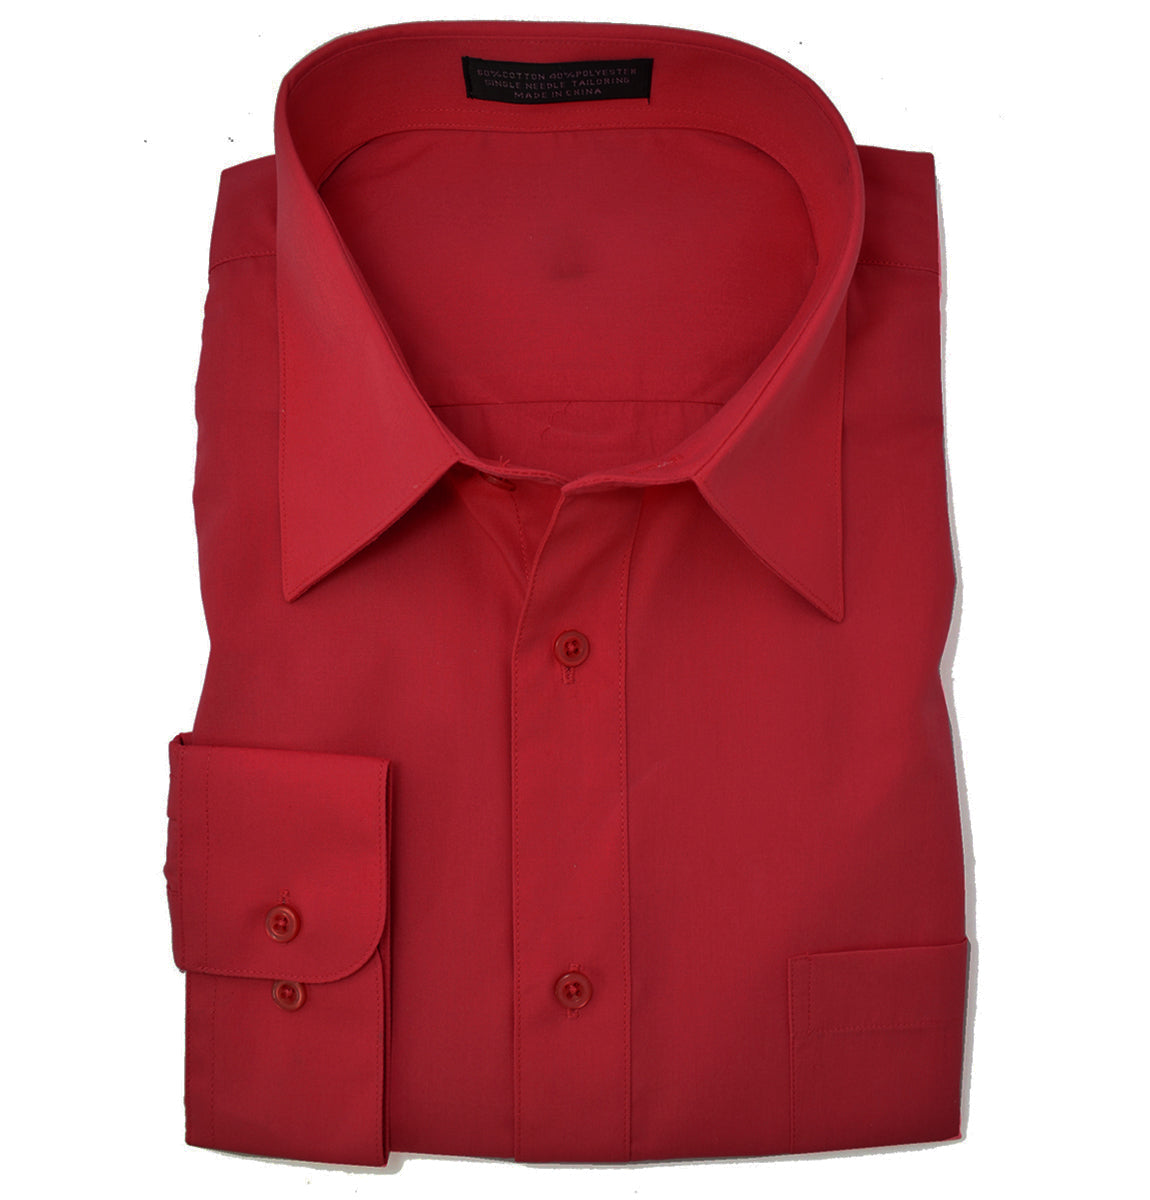 The Essential Solid True Red Men's Dress Shirt | Paul Malone